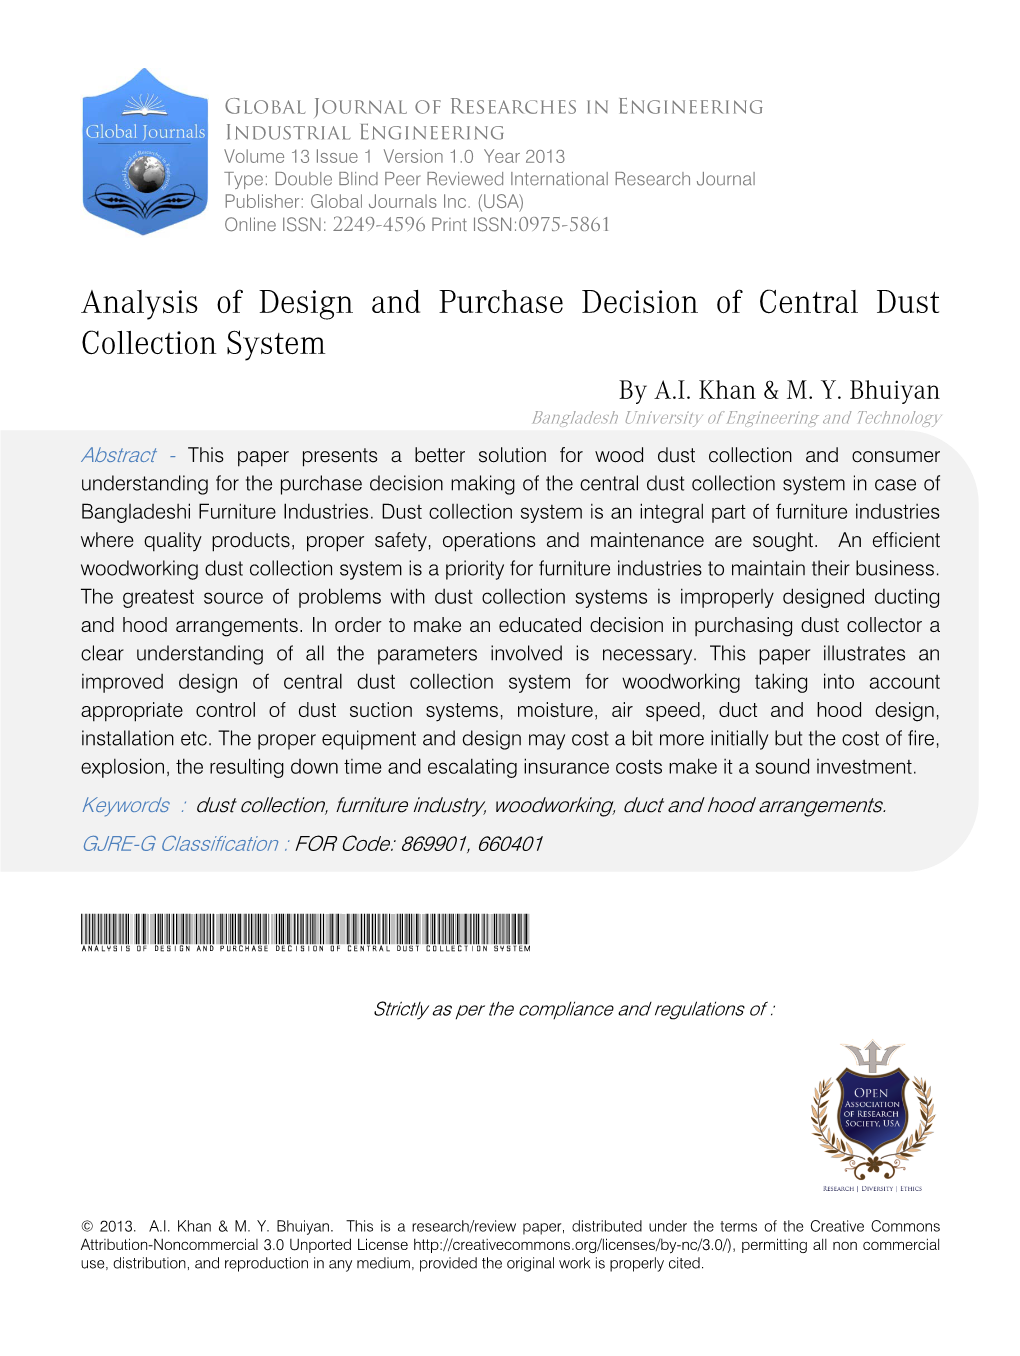 Analysis of Design and Purchase Decision of Central Dustcollection